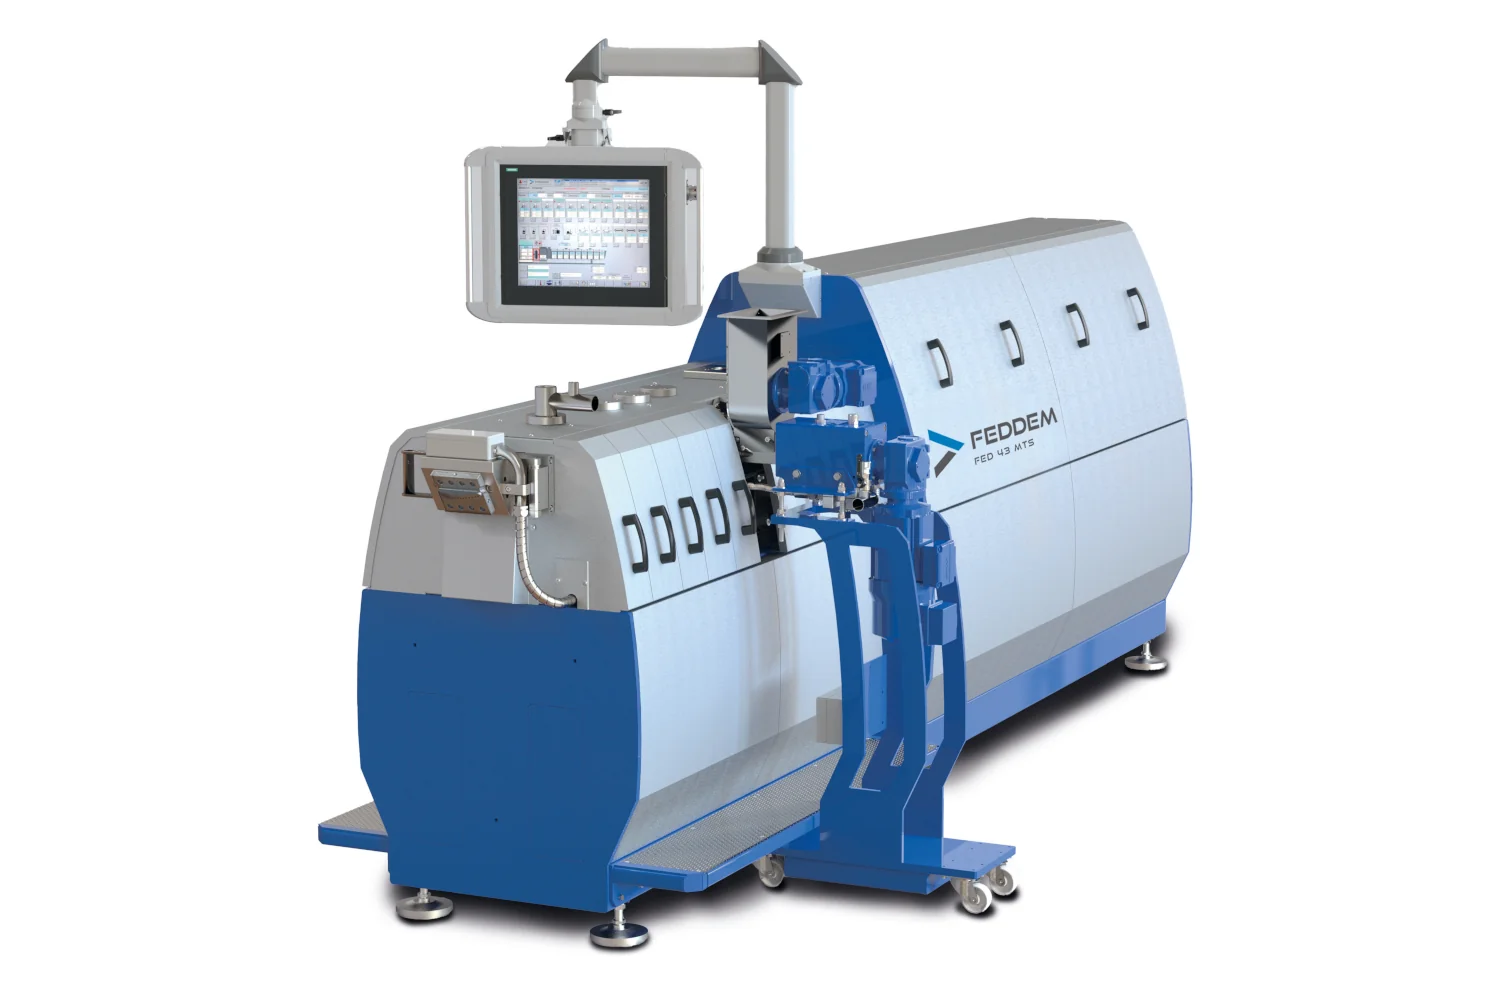 Figure 1: FEDDEM's twin-screw extruder MTS 43 with FSB-V side feeding with vacuum support.